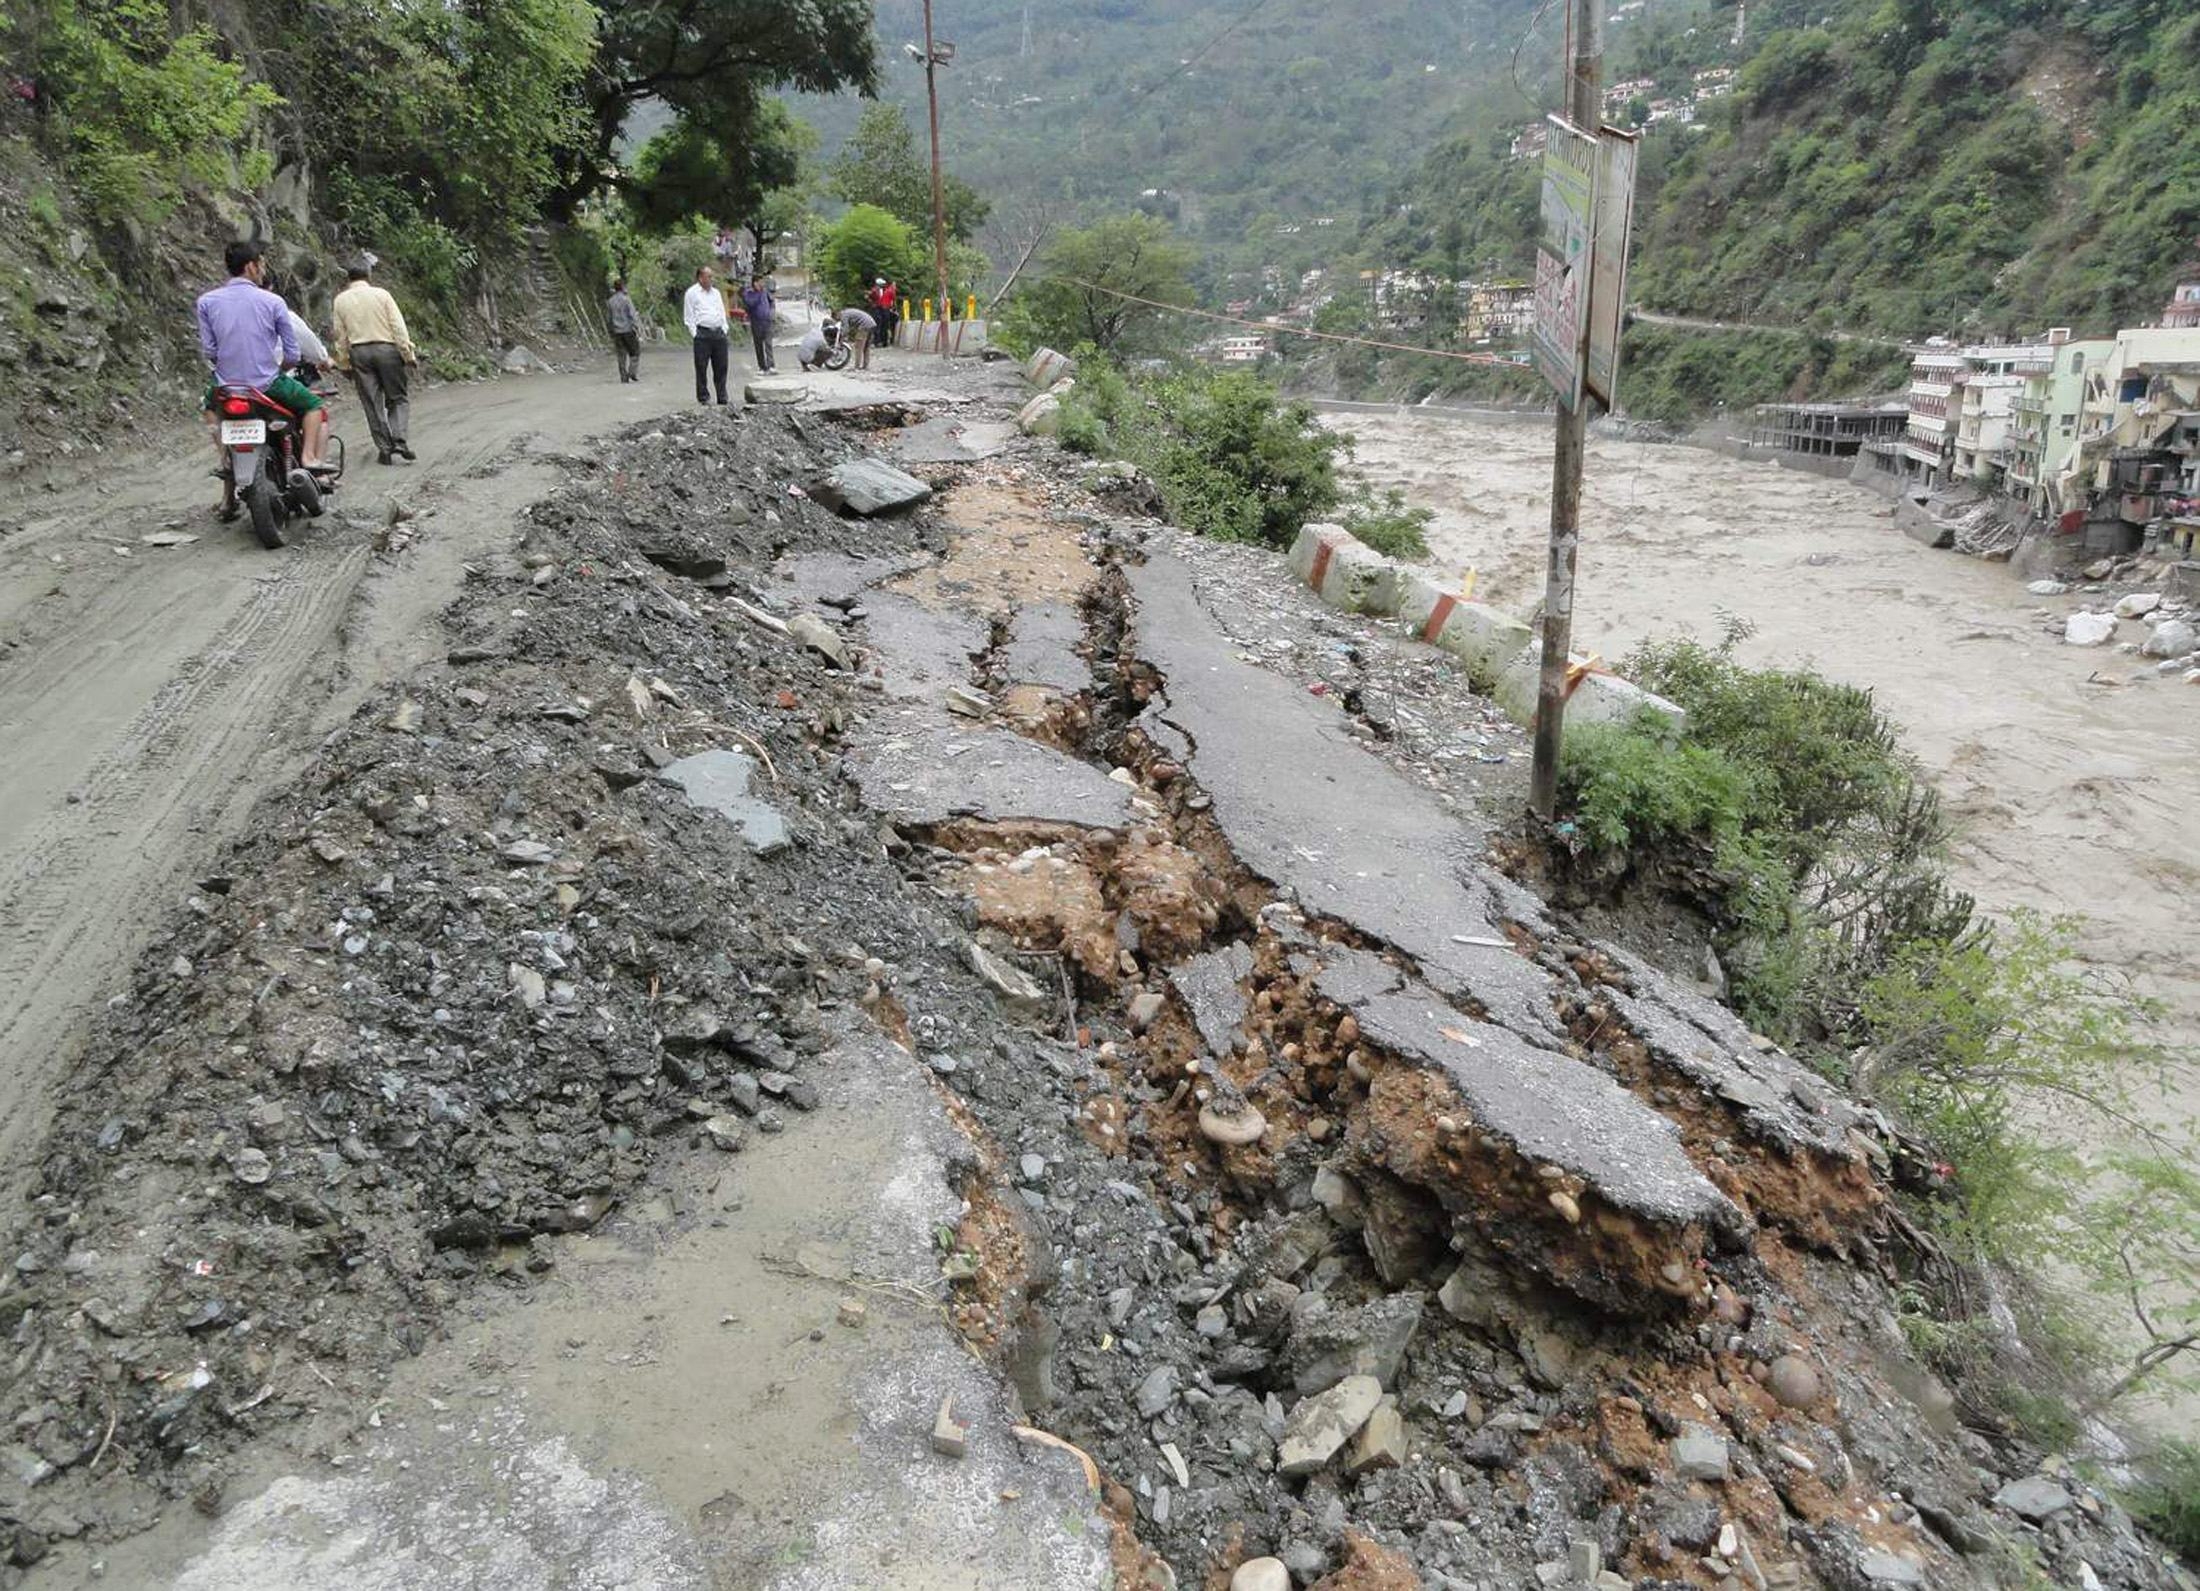 People walk along a damaged road after heavy rains in the Himalayan state of Uttarakhand. Thousands stranded in parts of northern India awaited rescuers. Photo: AFP